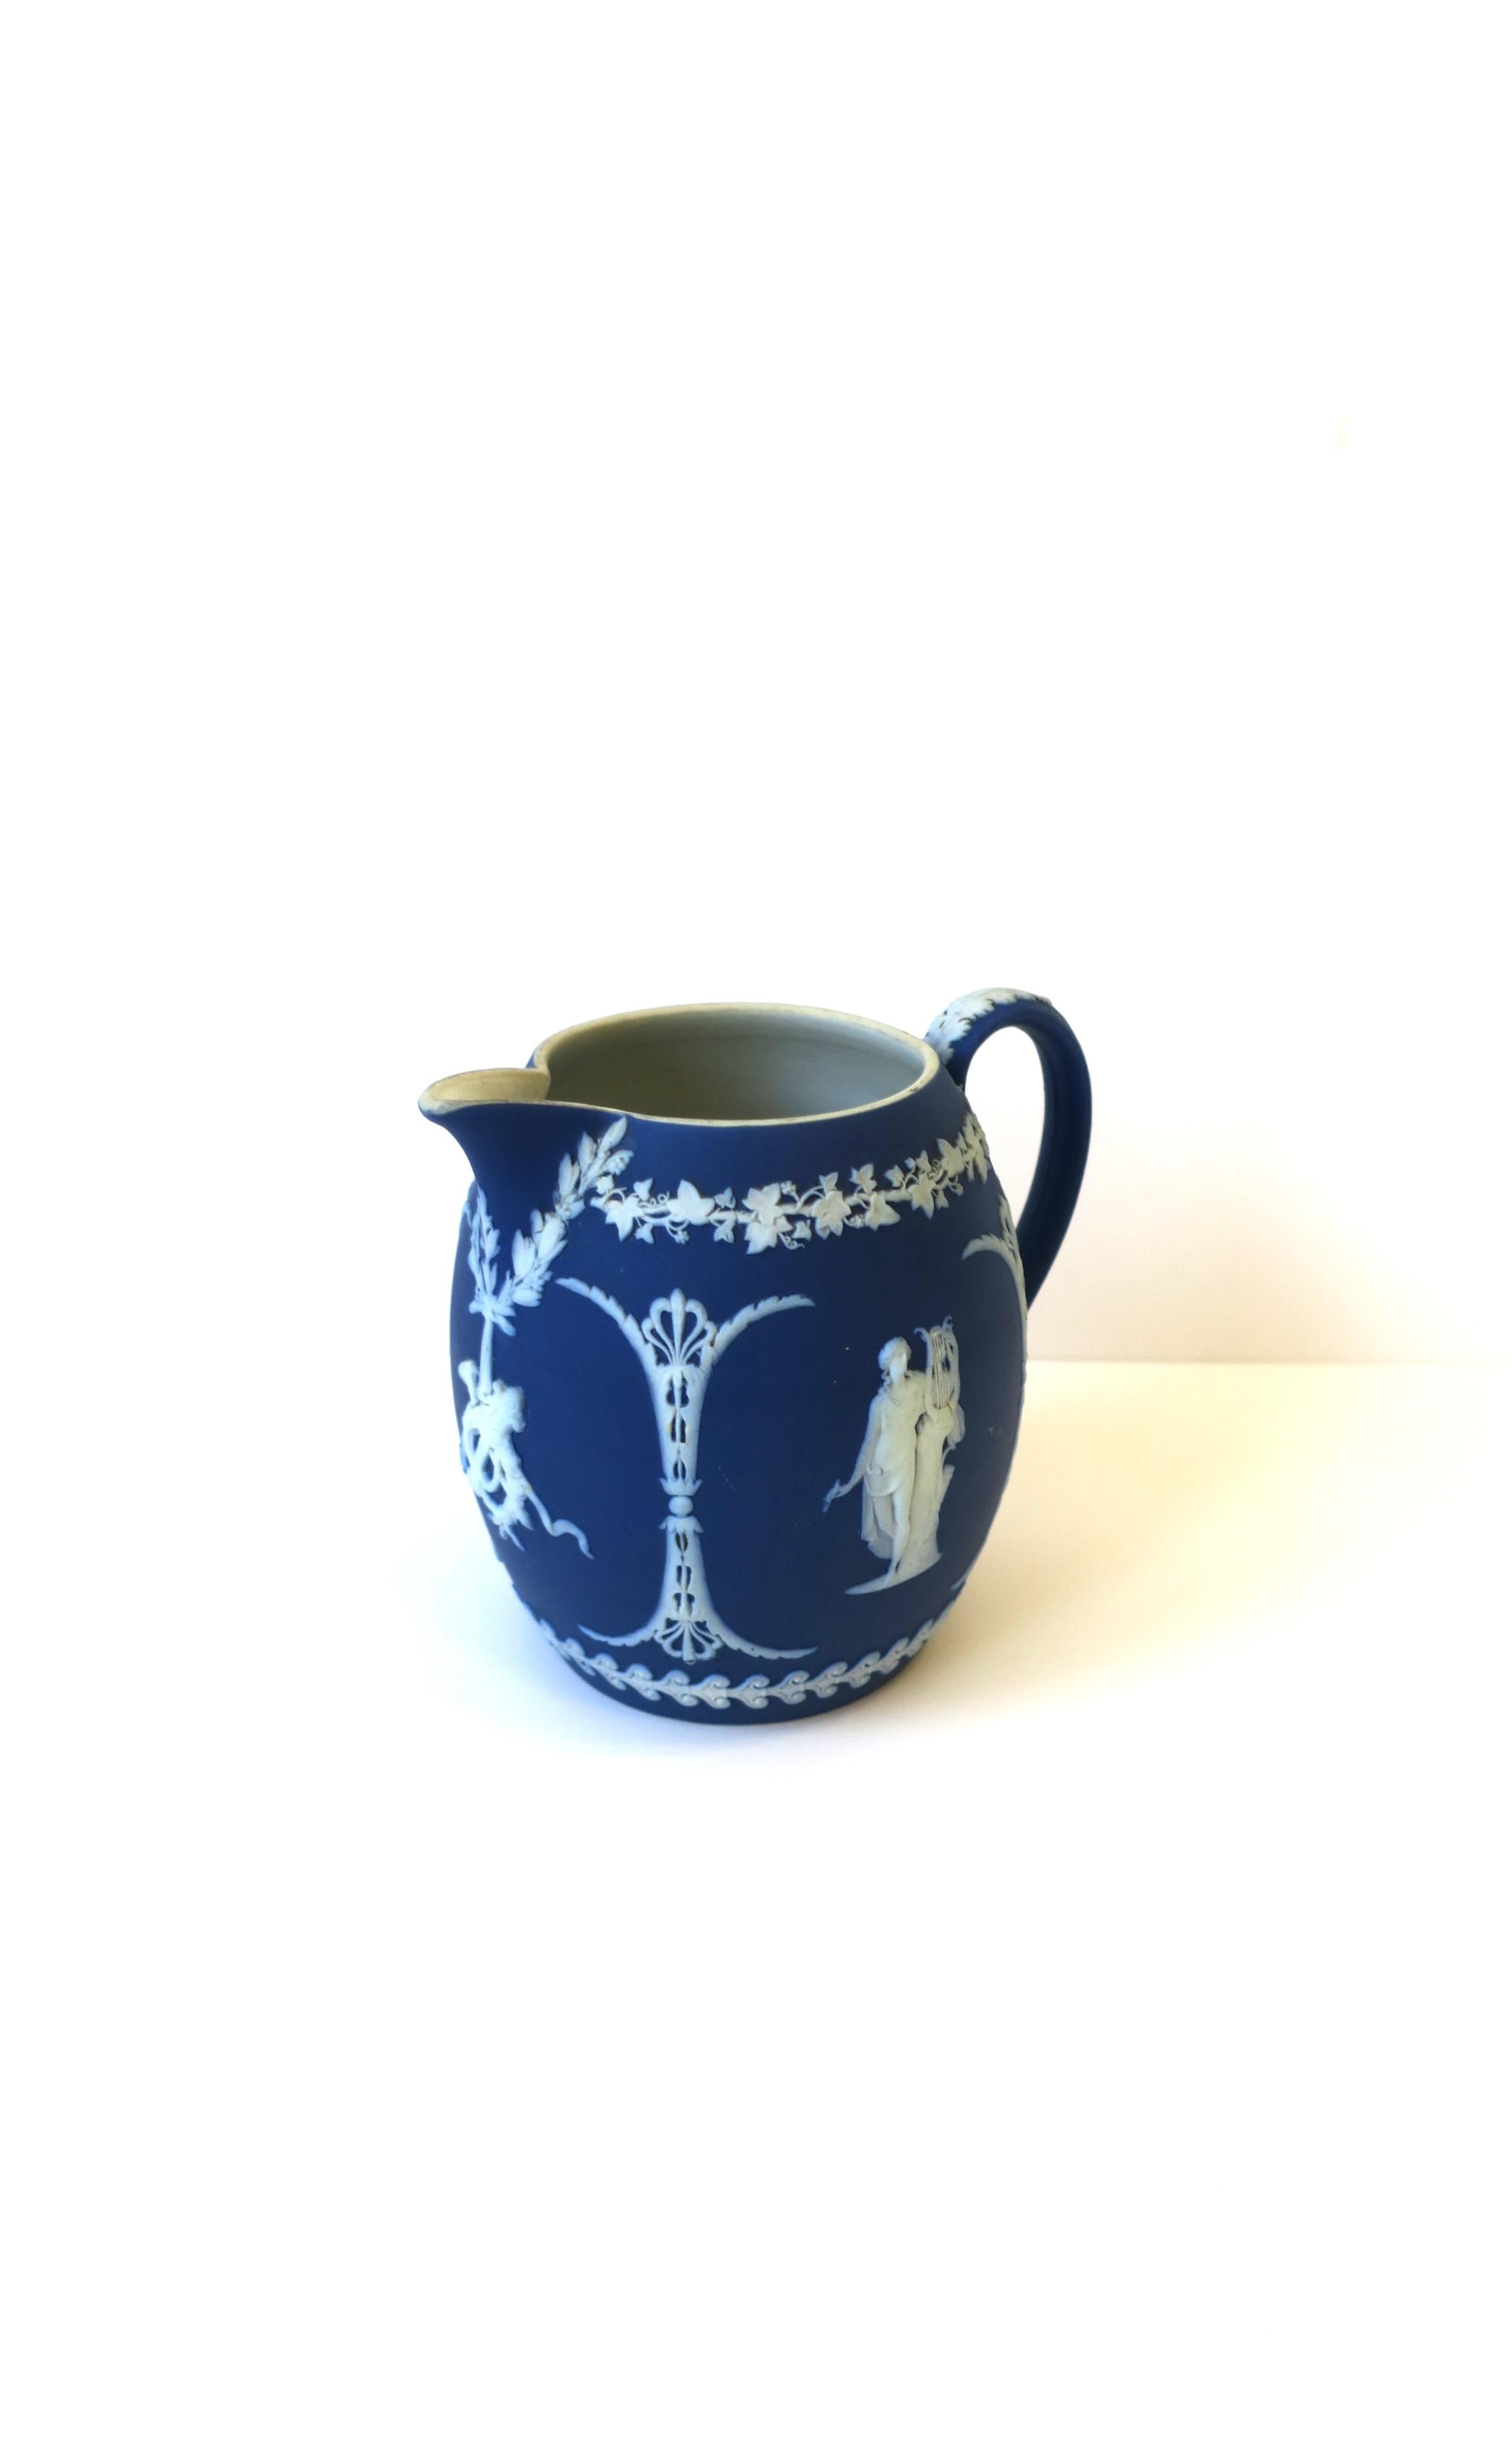 Unglazed Wedgwood Jasperware Blue and White Pitcher or Vase Neoclassical, England 19th C For Sale